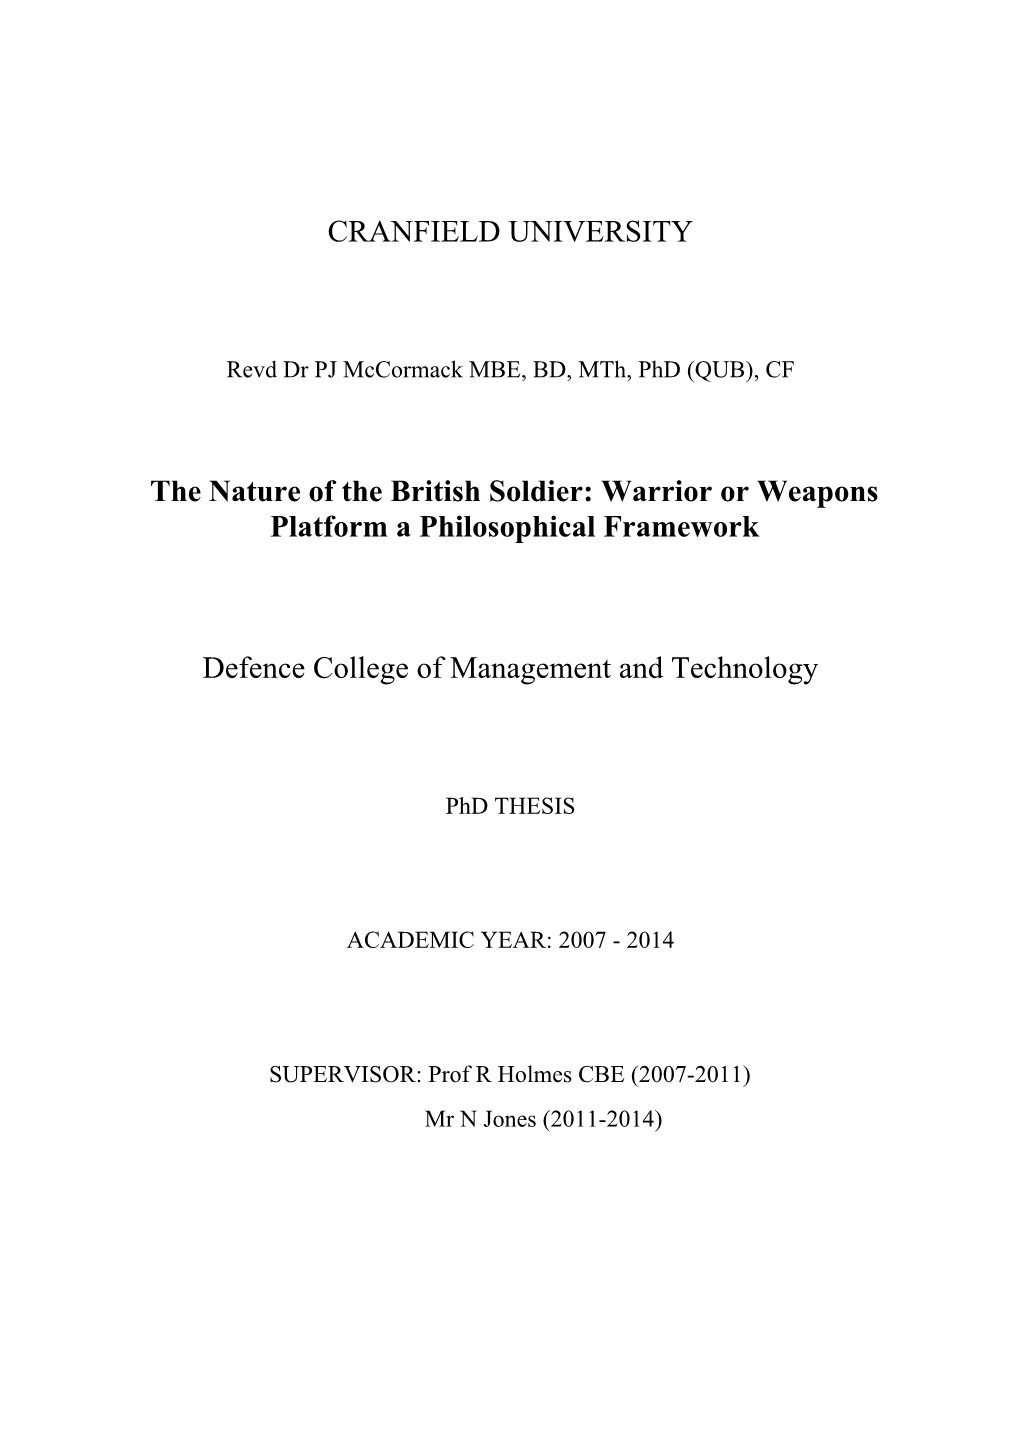 CRANFIELD UNIVERSITY the Nature of the British Soldier: Warrior Or